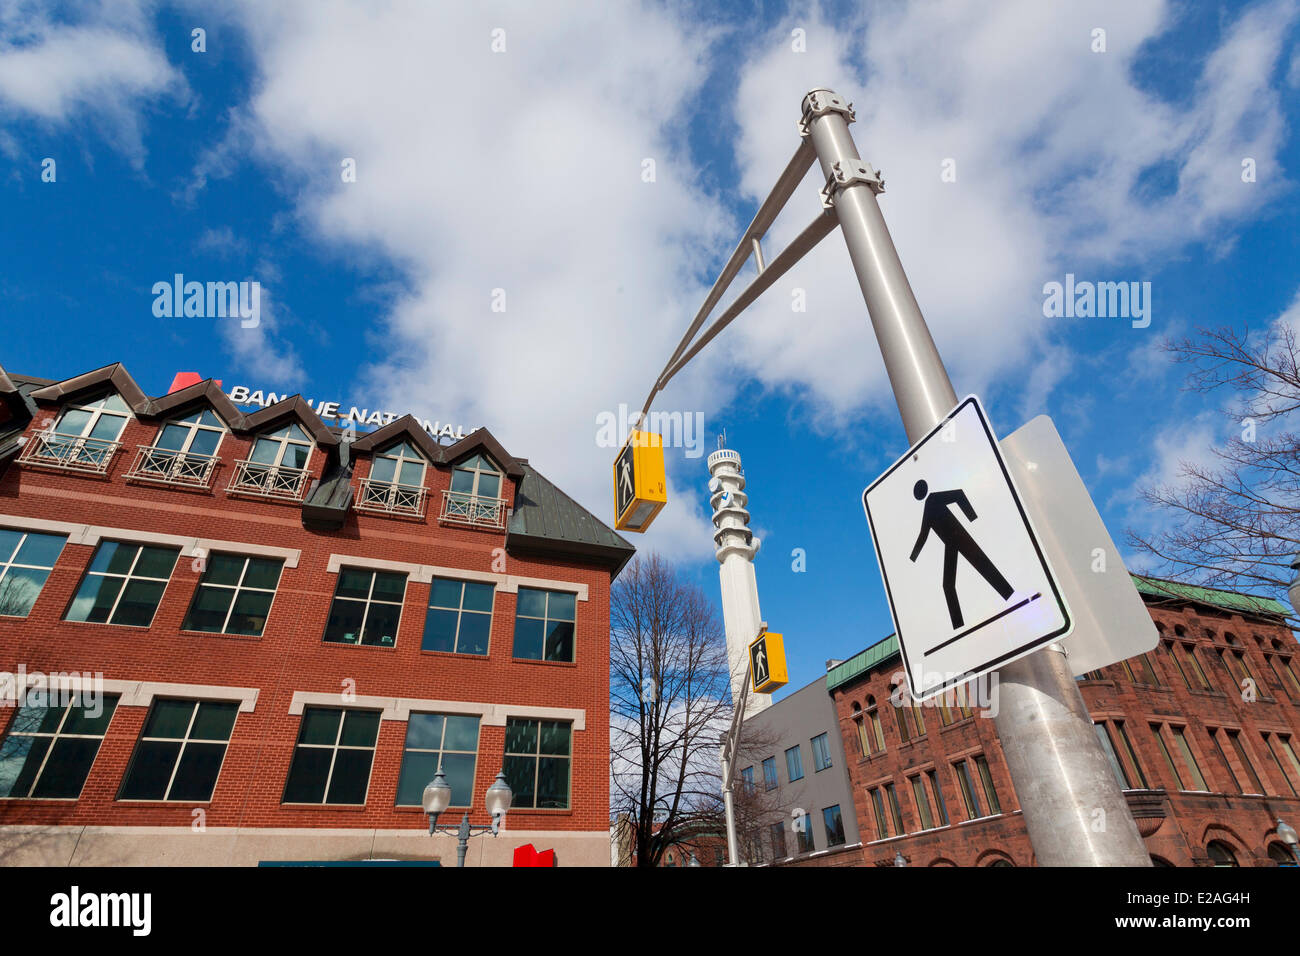 Canada, New Brunswick Province, Moncton, Main Street, traffic lights and pedestrian crossing Stock Photo